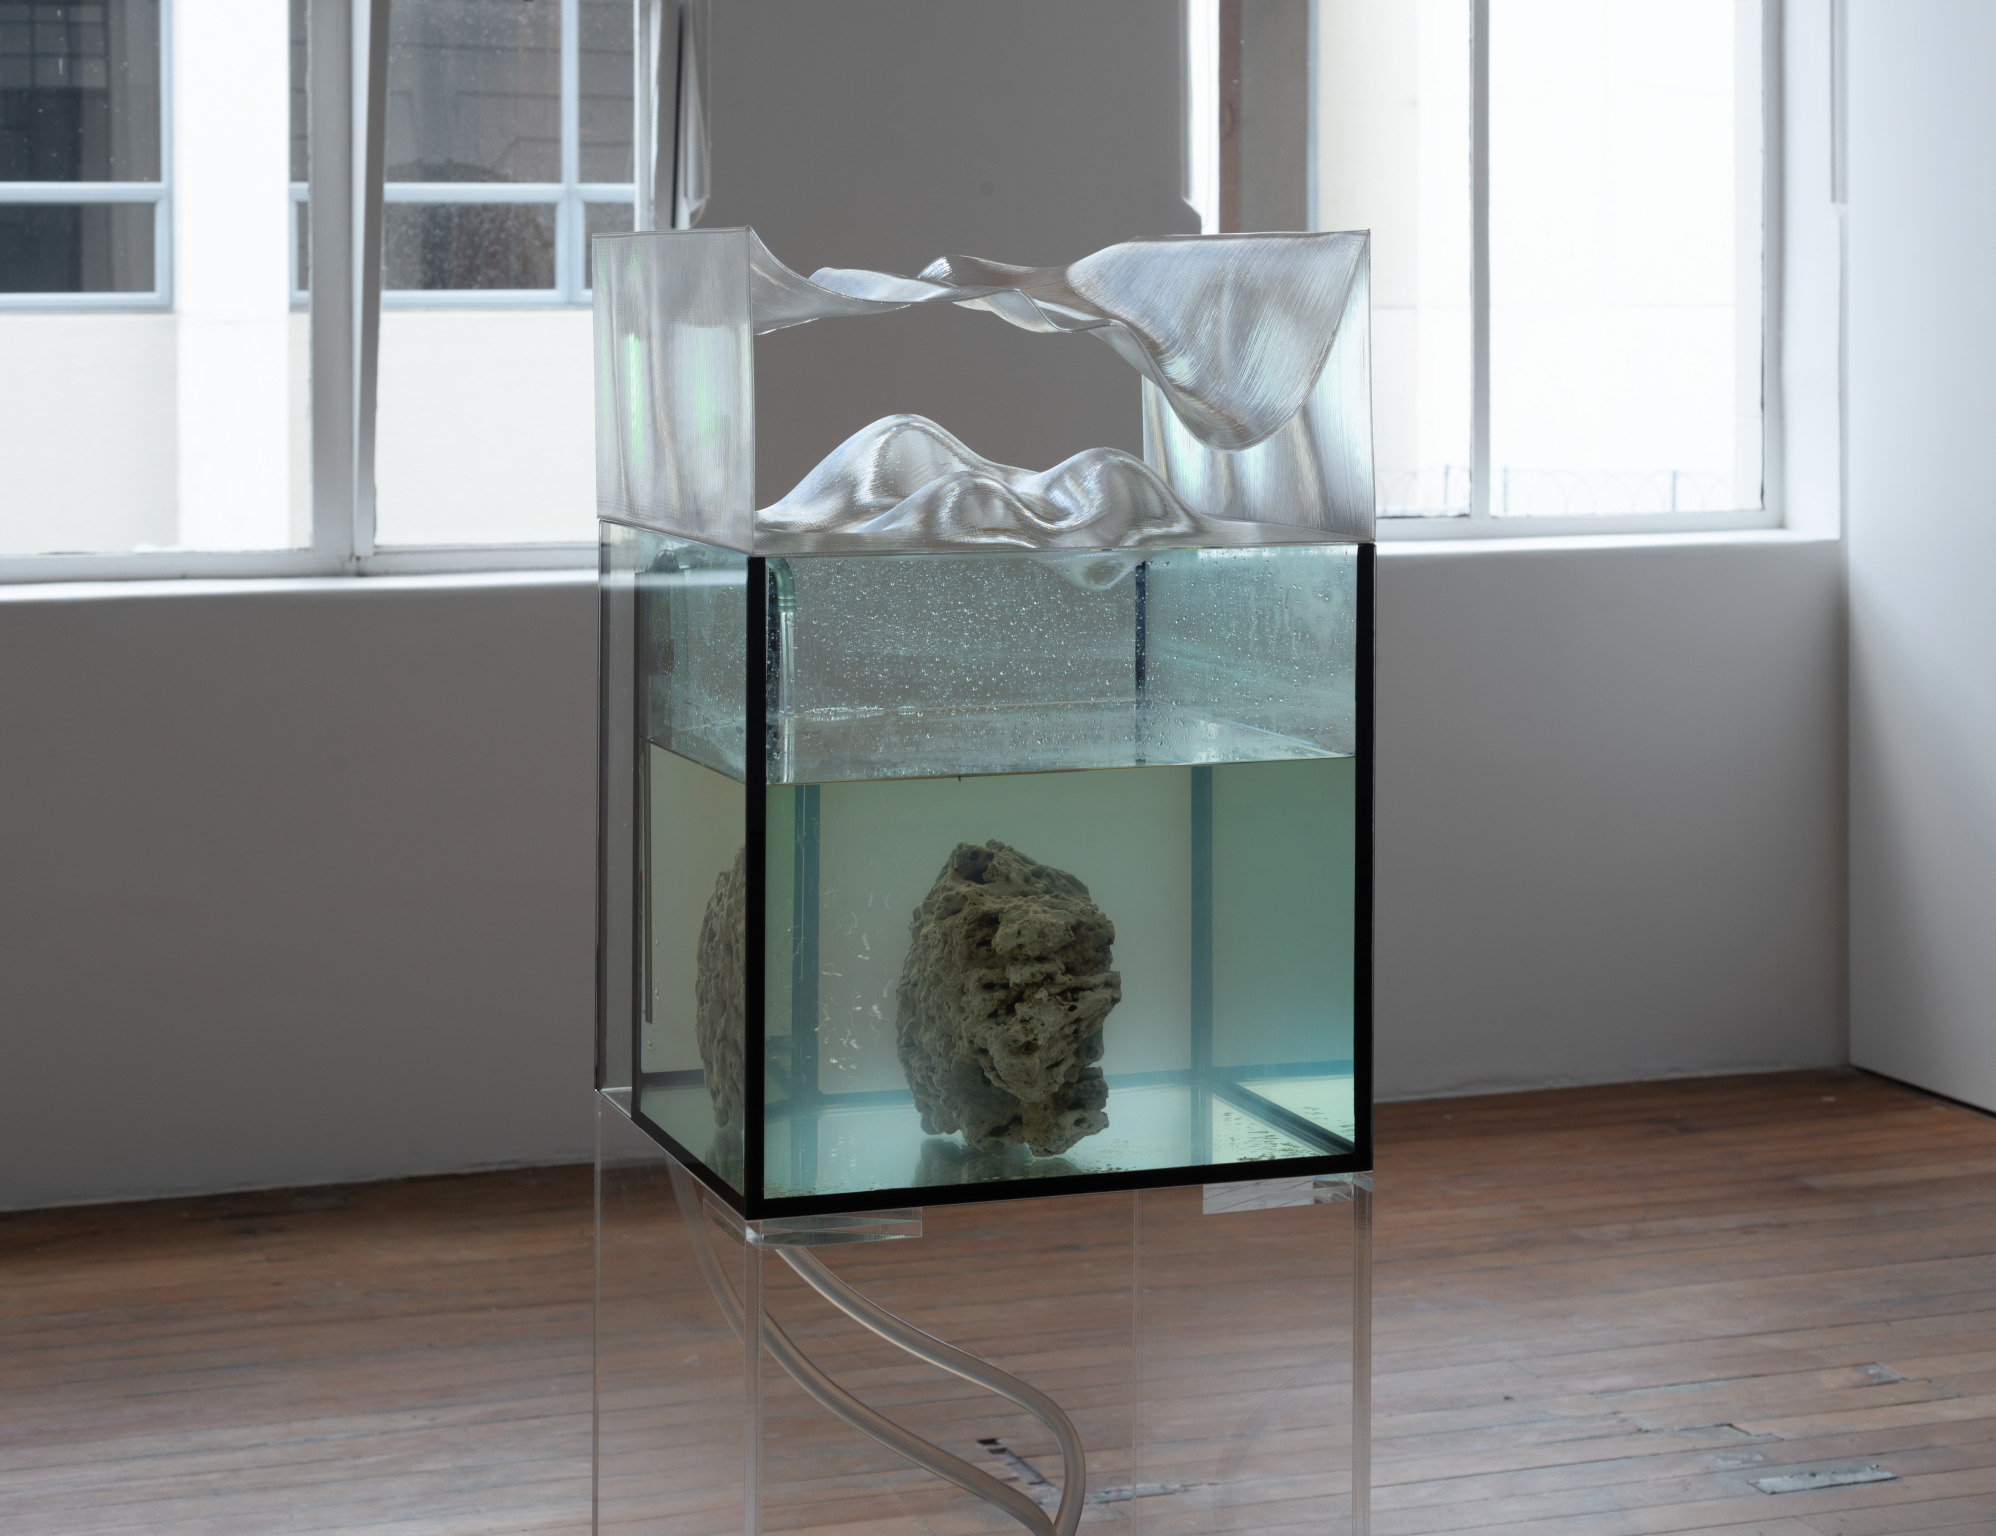 Installation view: Richard Frater, Stop Shell (live rock version), 2019, fossilised coral, 3D printed macroscopic graphs, coral organism, marine aquarium, bio-media, plexiglass, 1460 x 400 x 400mm; in: “Indifference”, Michael Lett Gallery